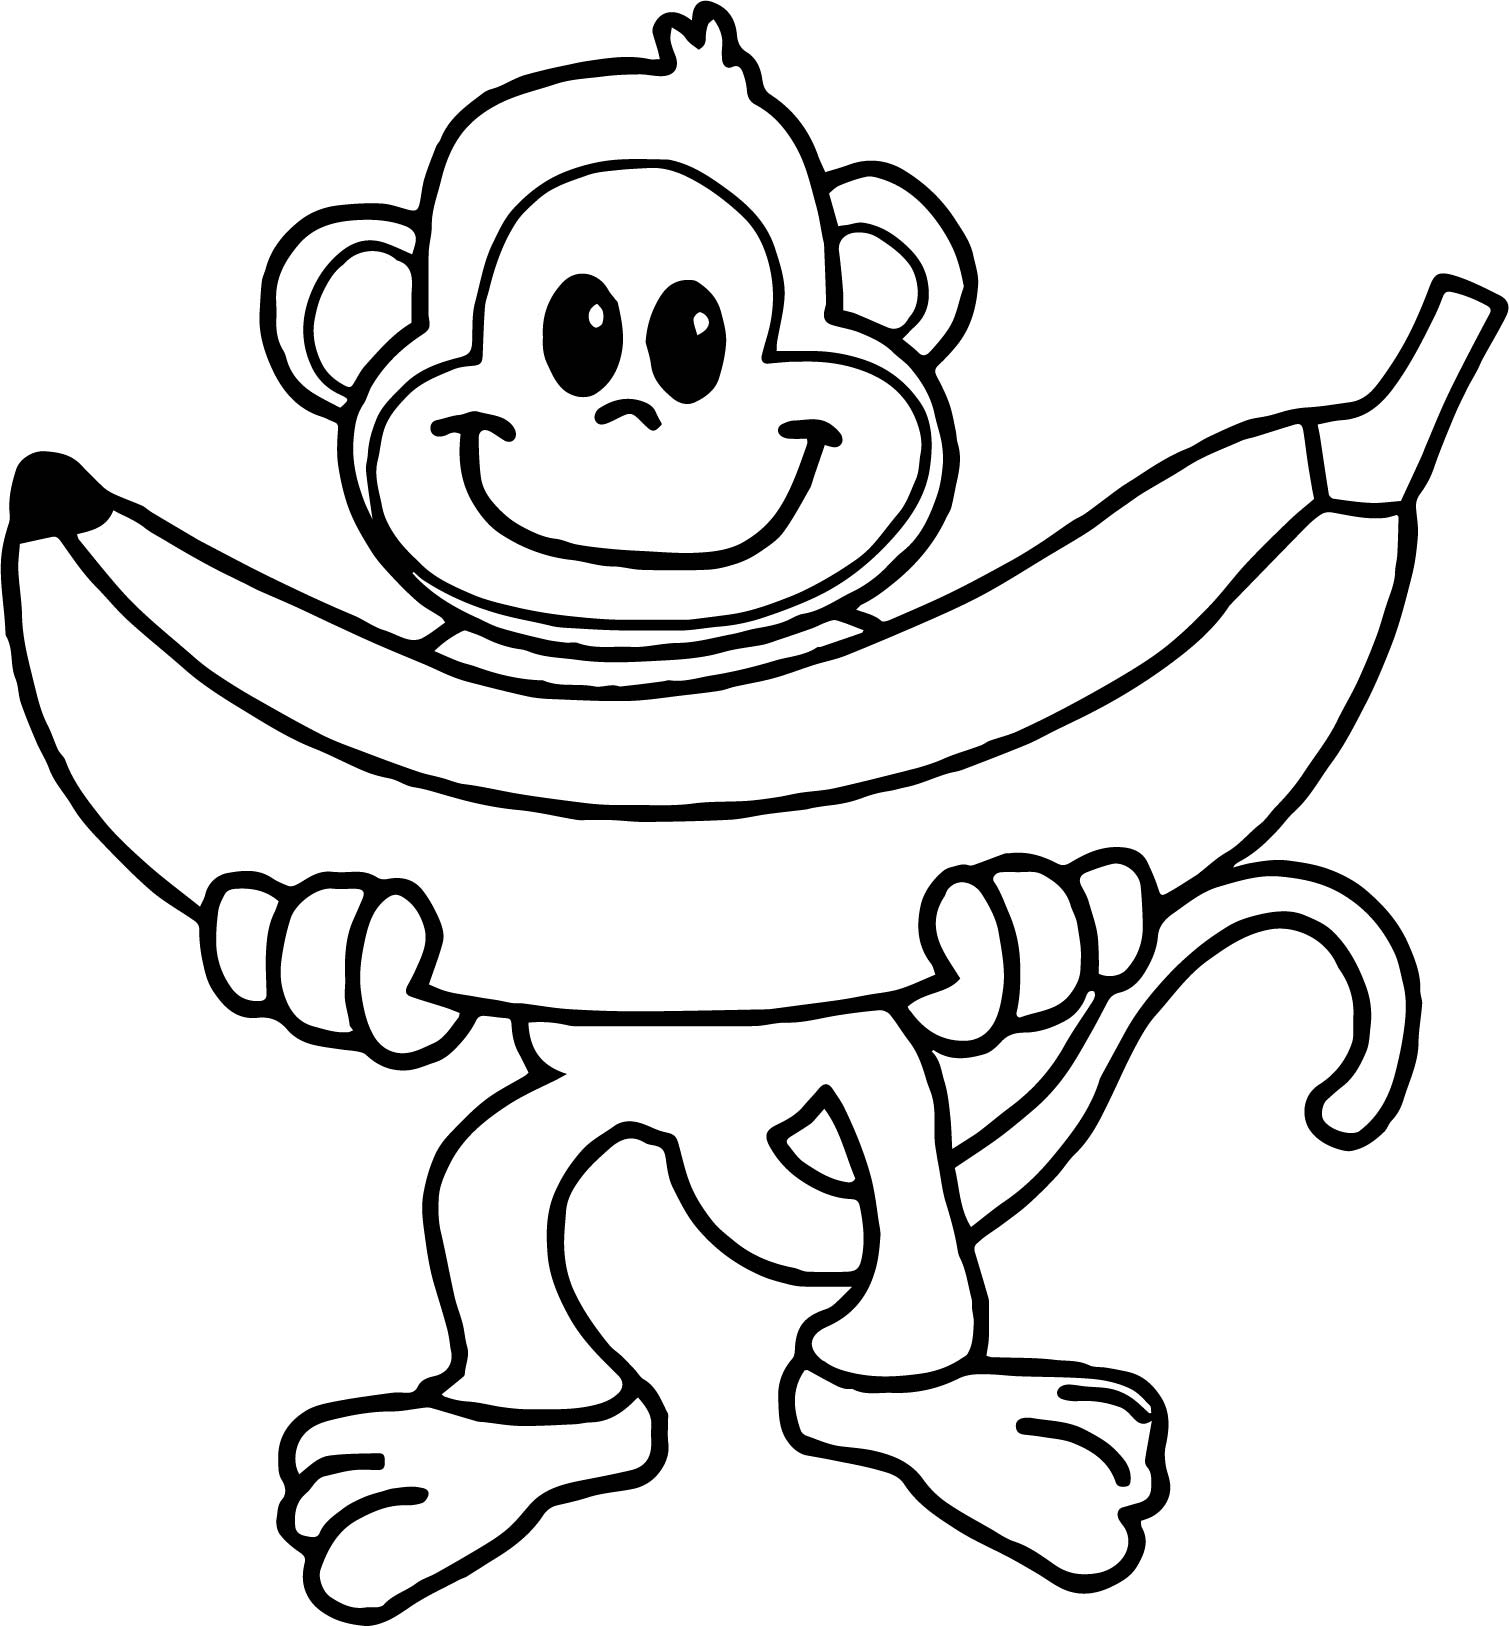 colouring pictures of monkeys free printable monkey coloring pages for kids pictures colouring of monkeys 